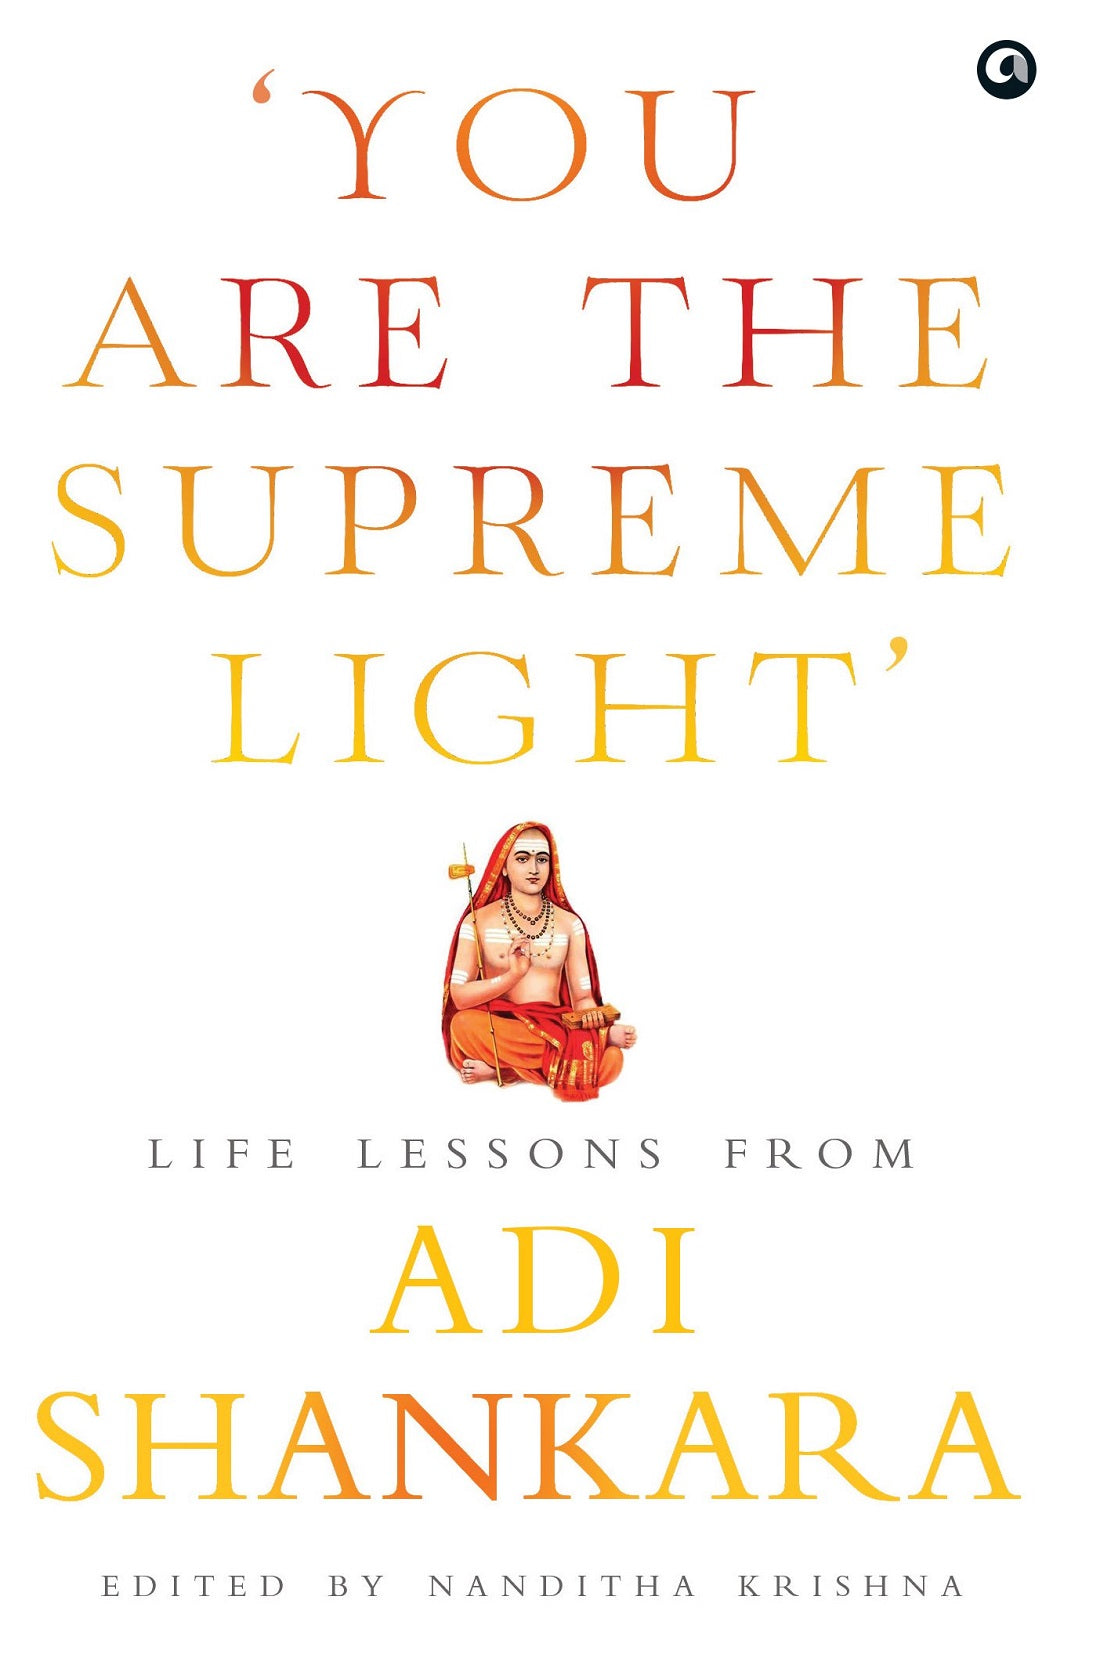 YOU ARE THE SUPEREME LIGHT LIFE LESSONS FROM ADI SHANKARA